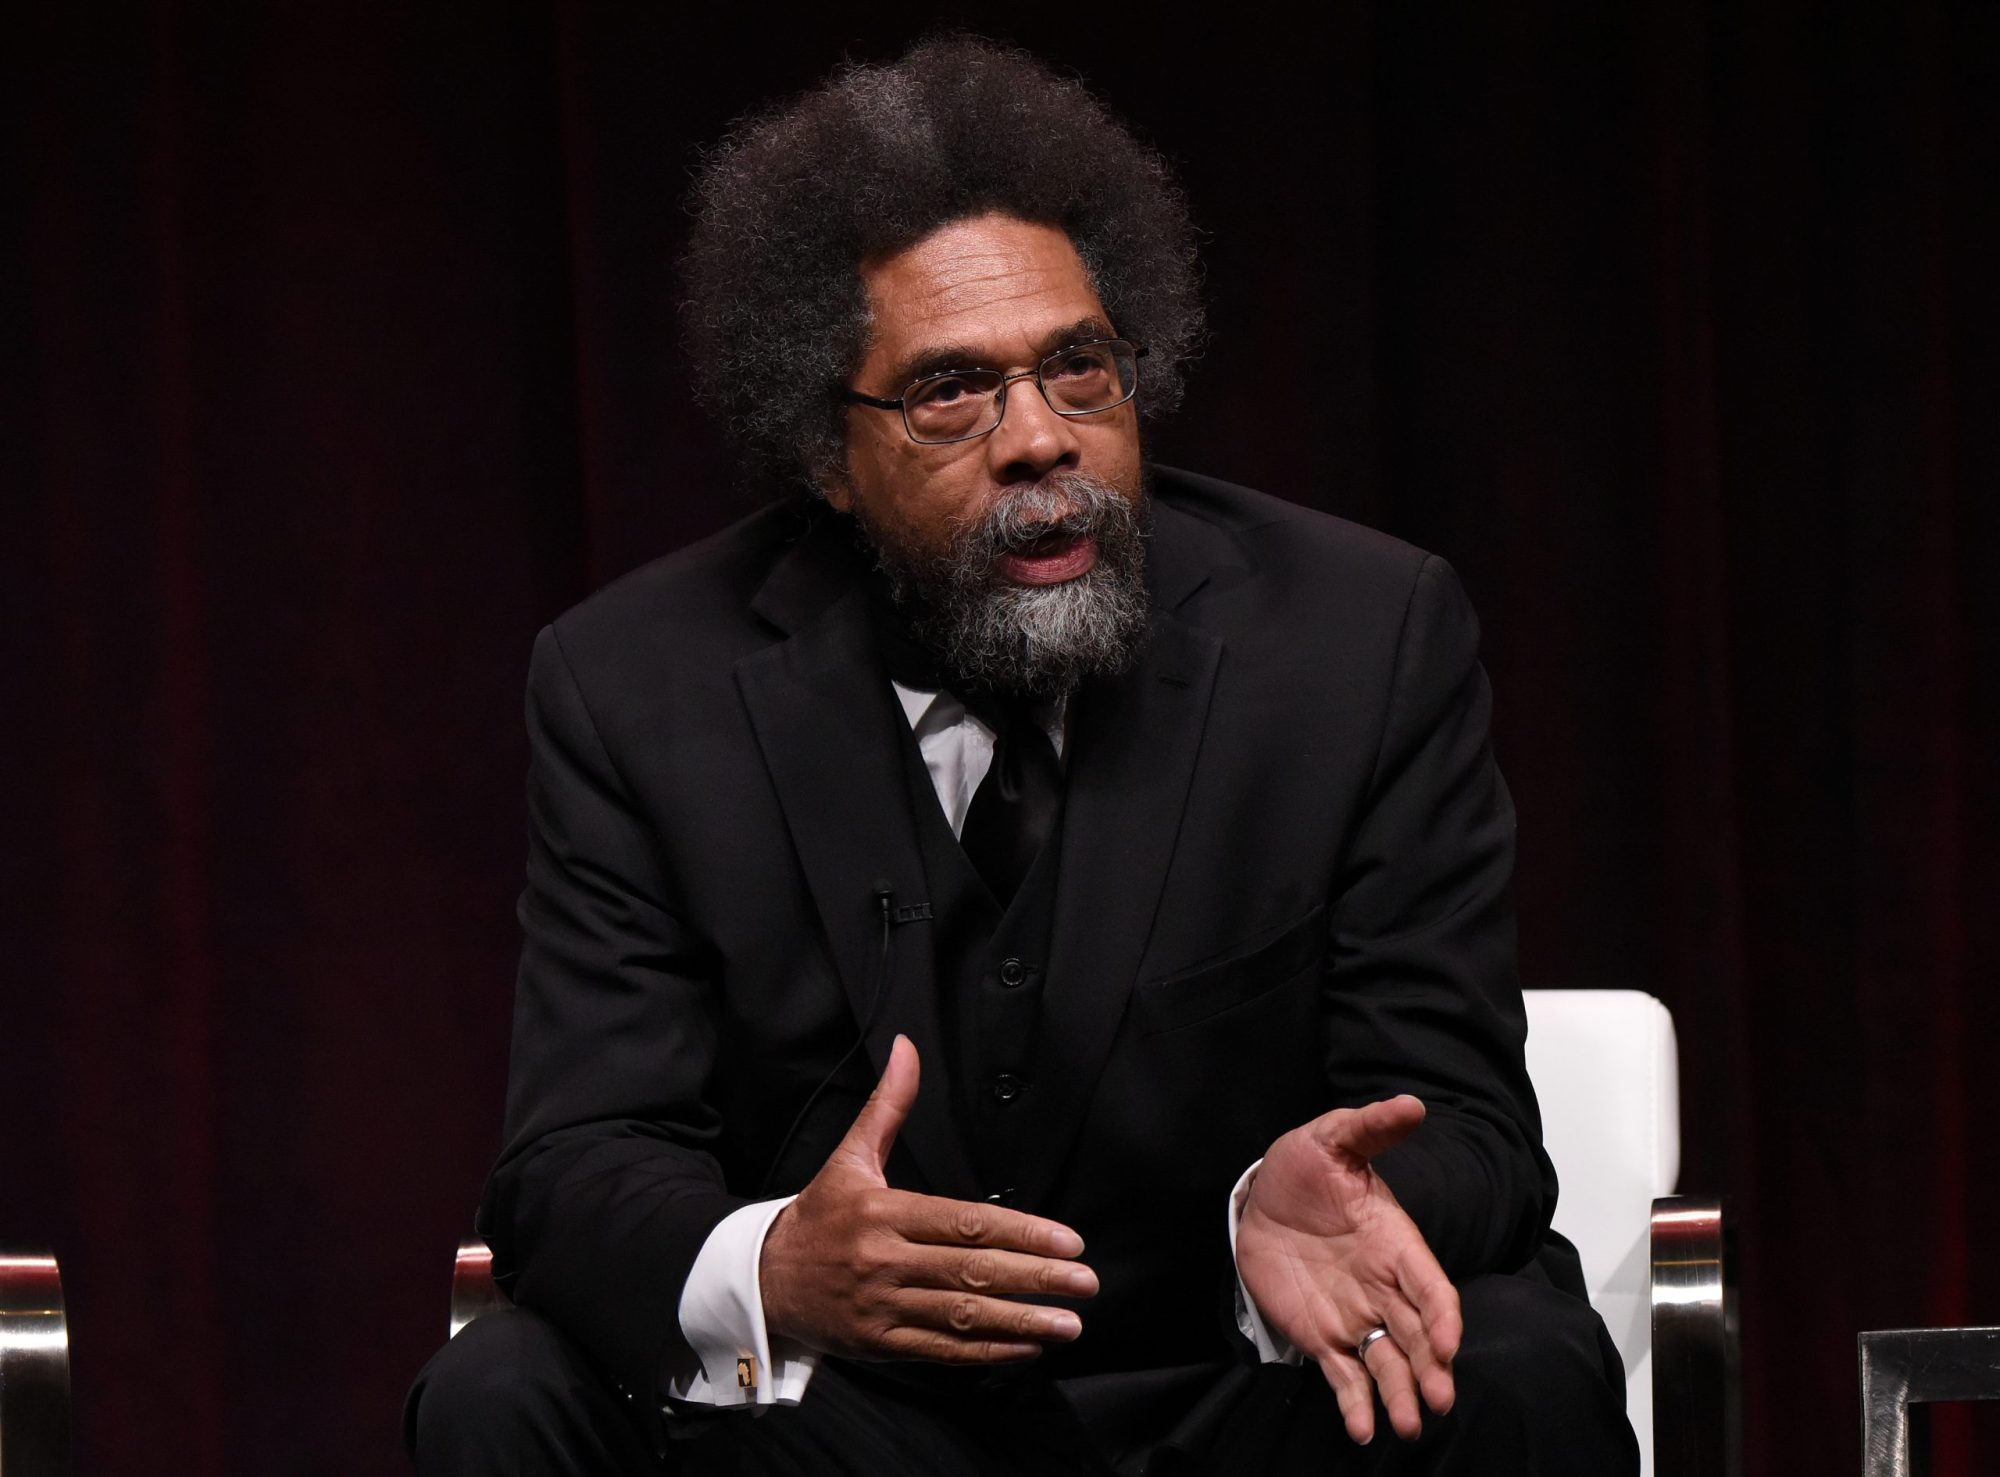 Dr. Cornel West. Photo by Rob Latour/Variety/Penske Media via Getty Images